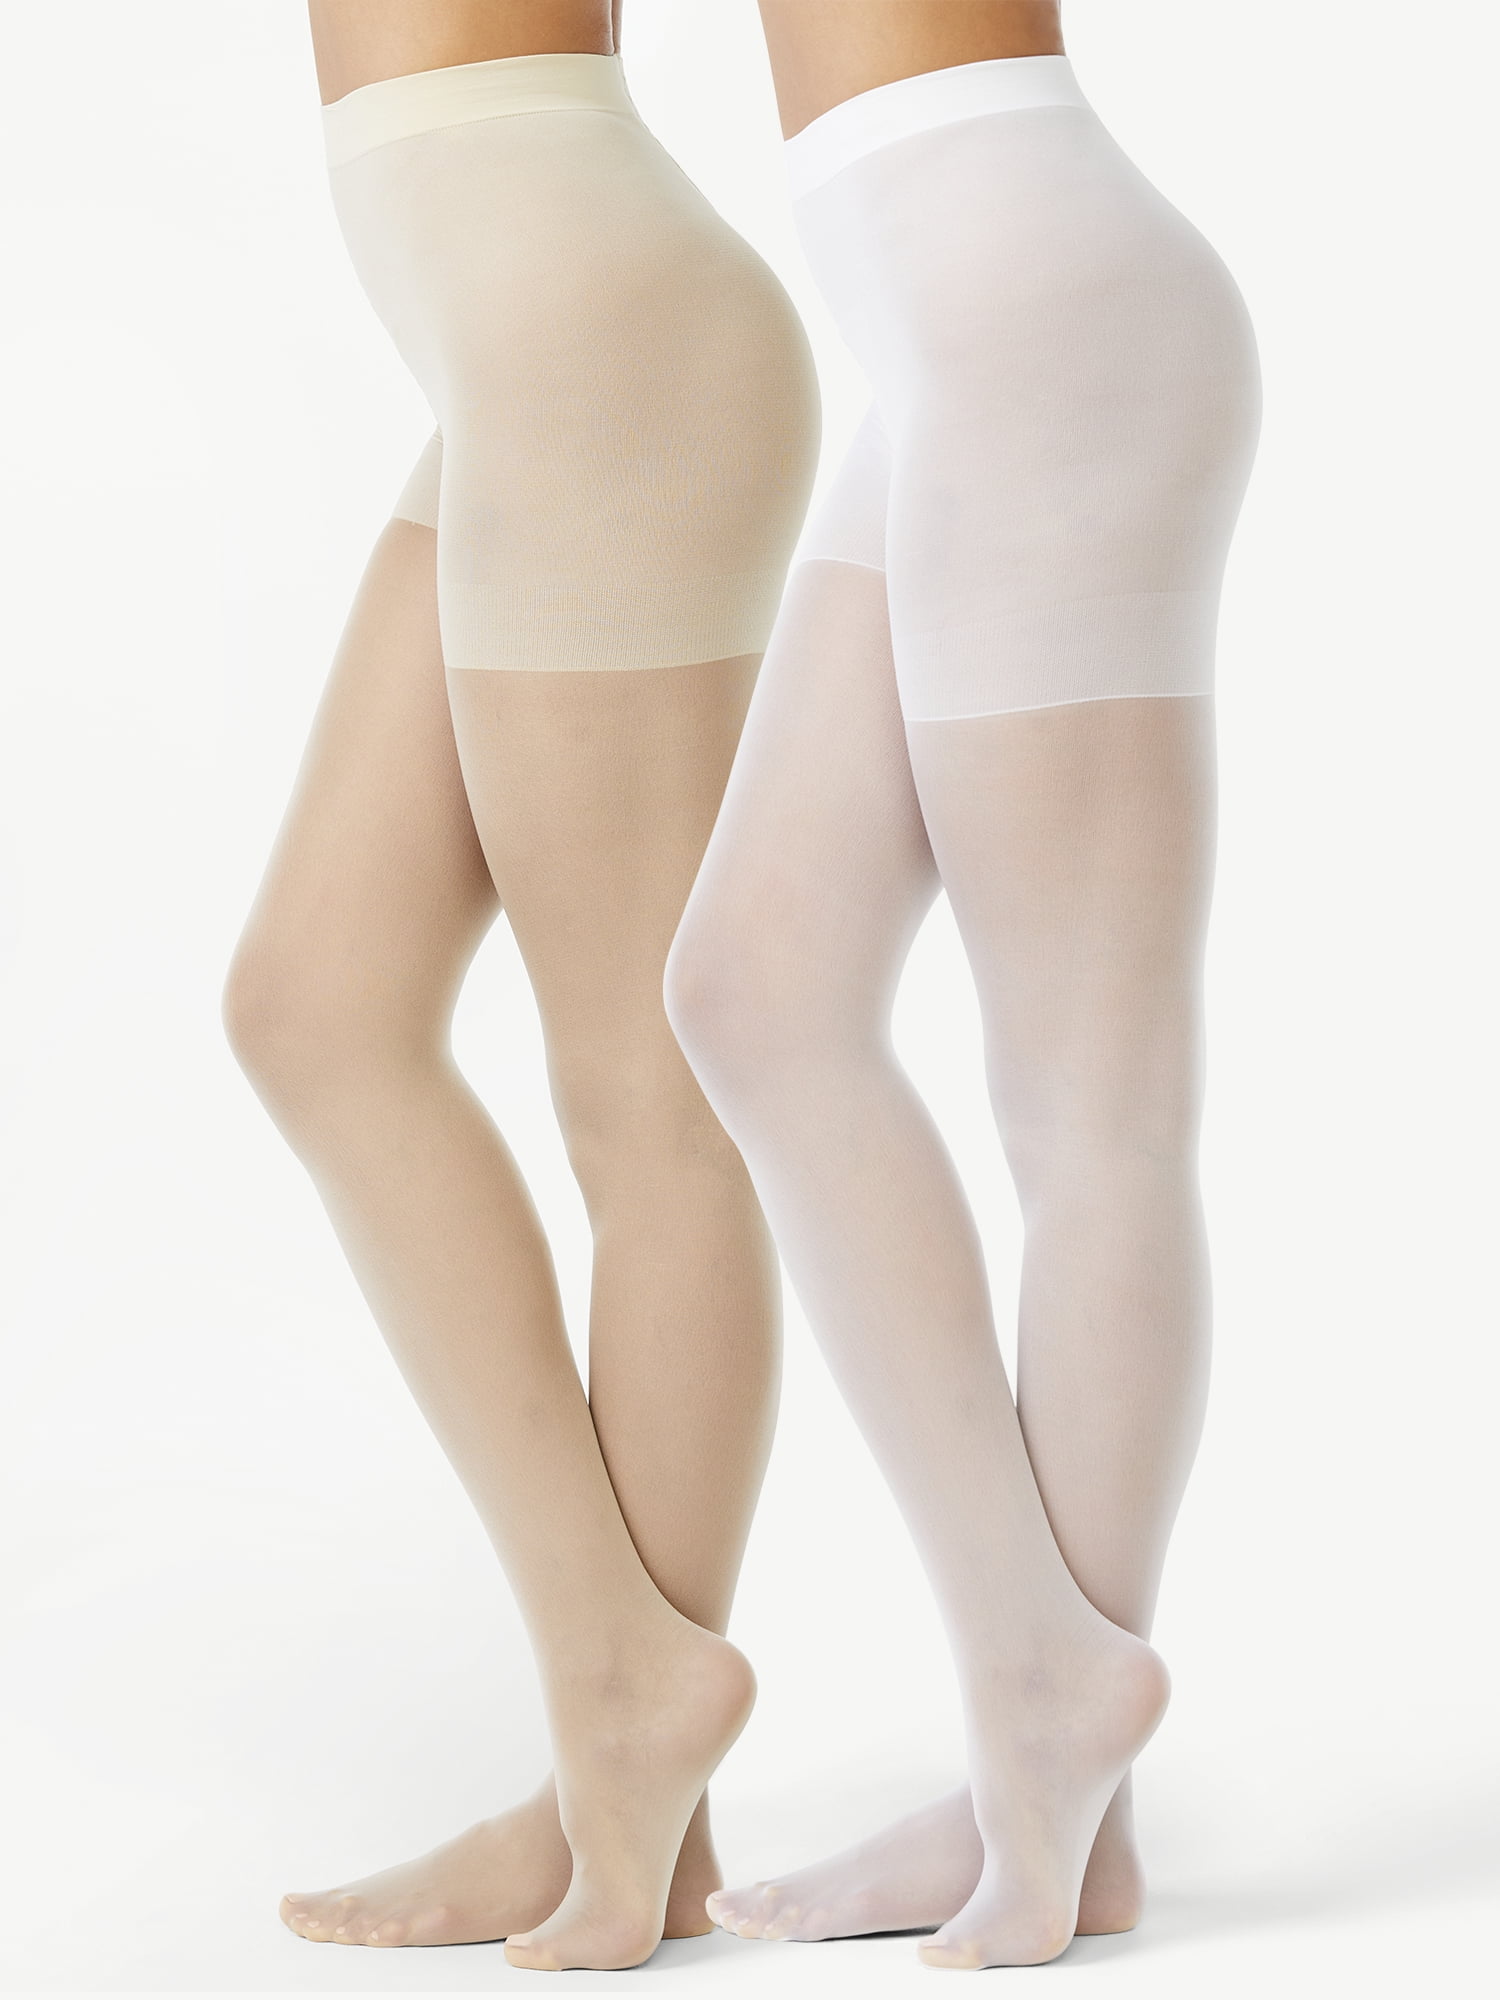 Cette - Women's Cream Gold Opaque Tights, Recycled Tights, Sizes up to –  TheMirrorTable